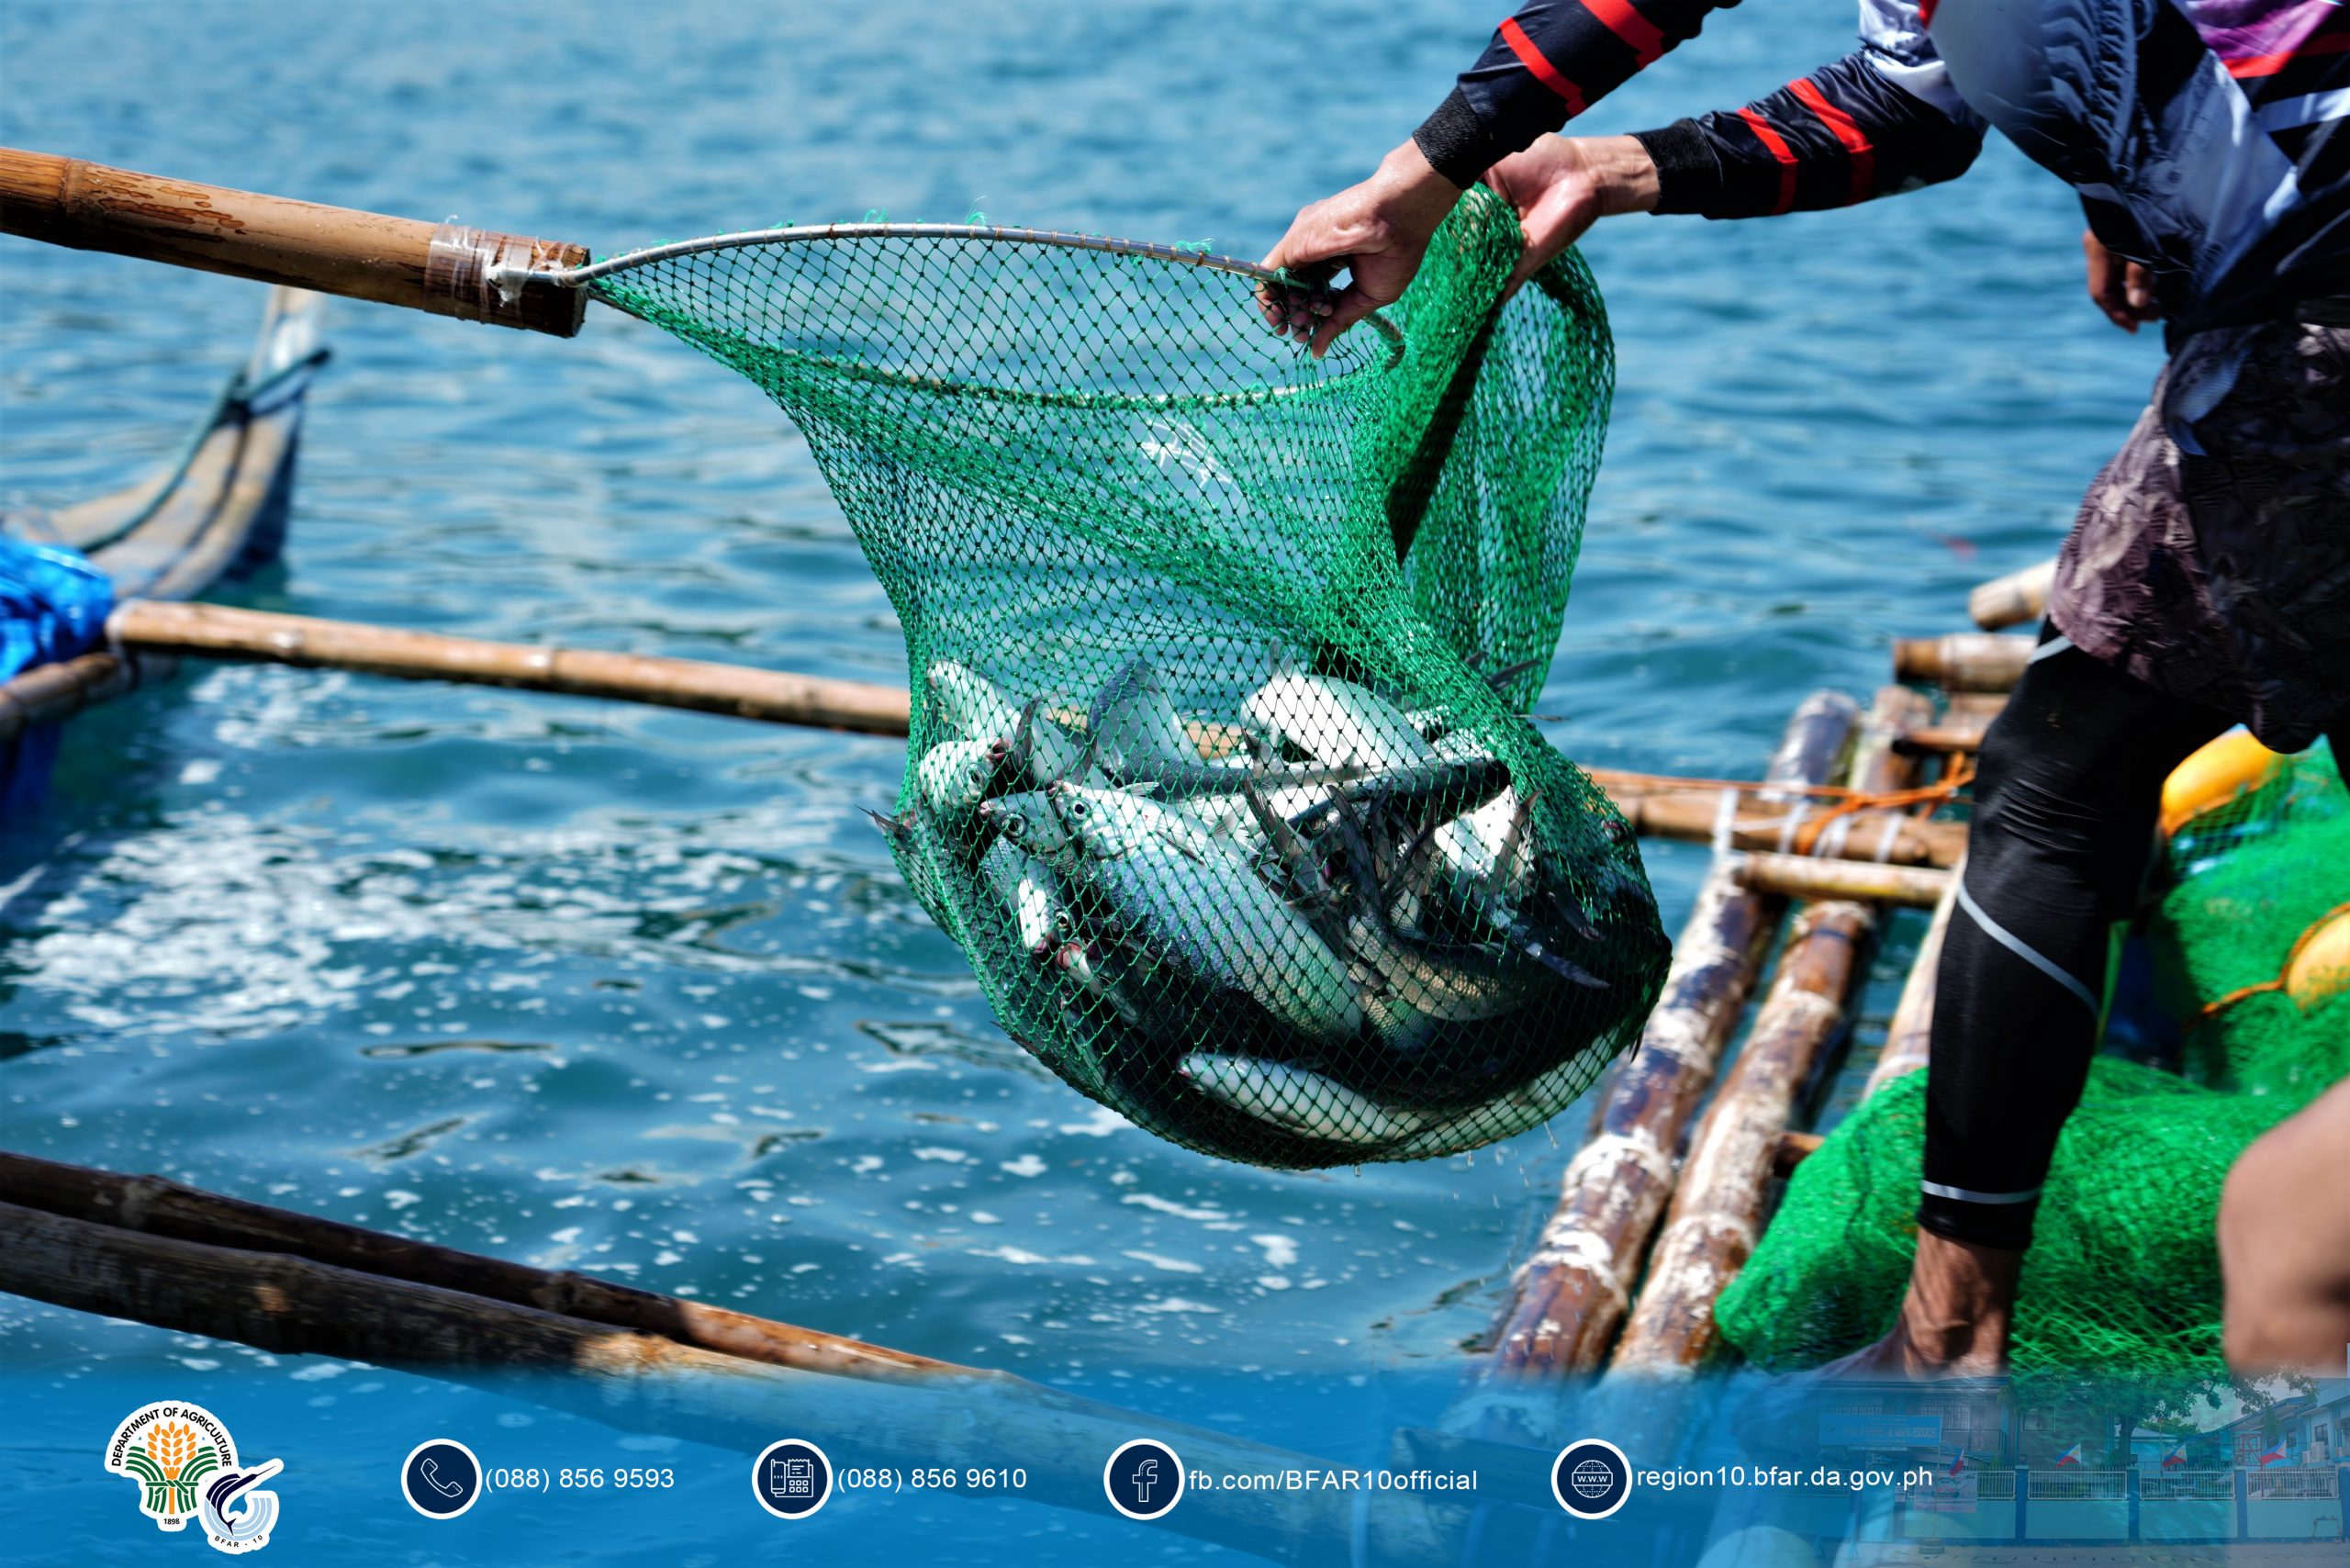 LIFFACO in Lanao del Norte generates over Php 860K by selling fresh bangus